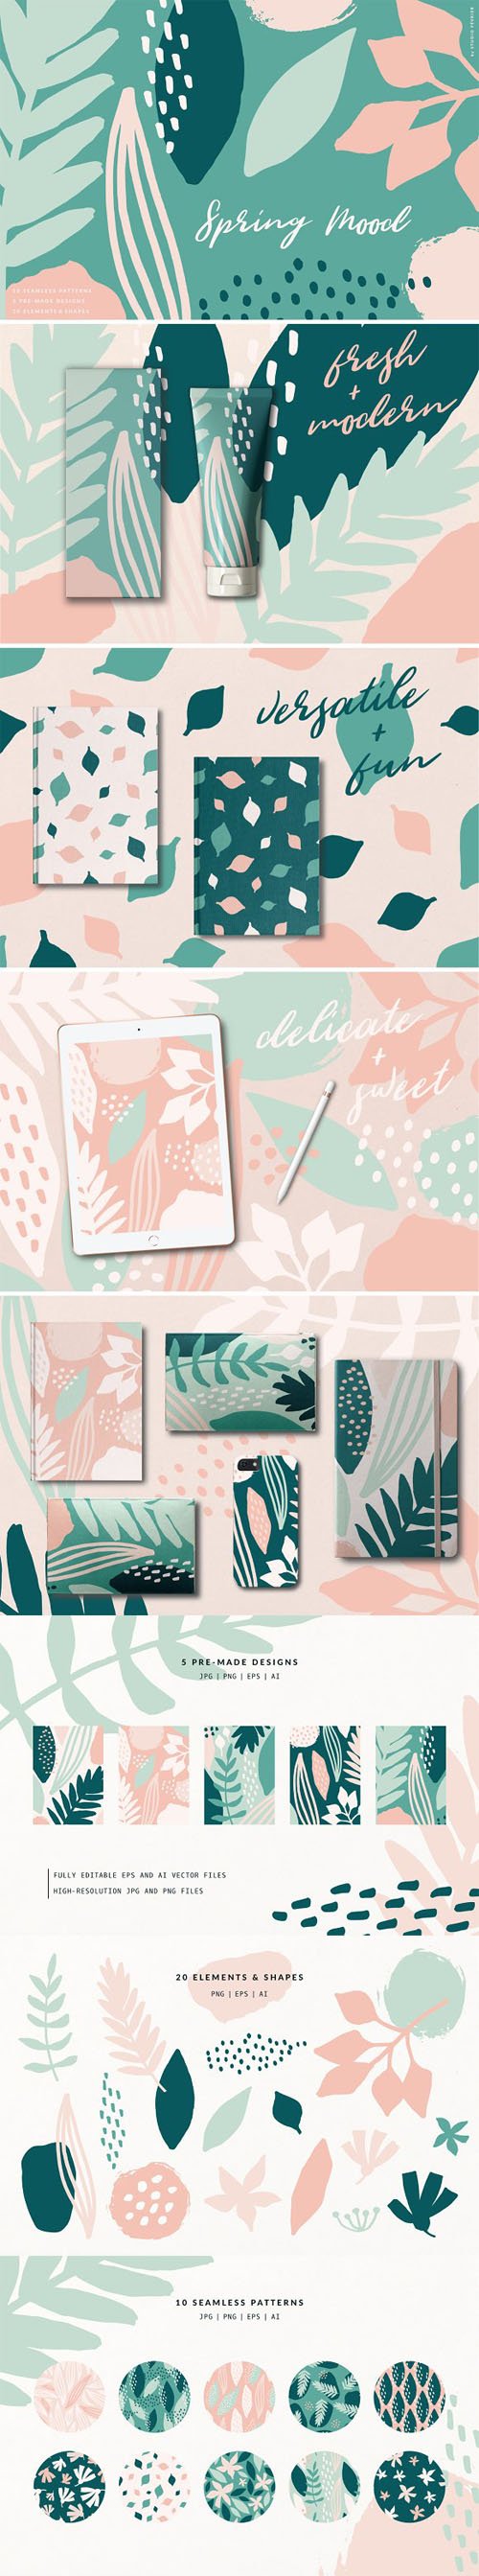 Spring Mood - Vector Patterns +Elements Collection